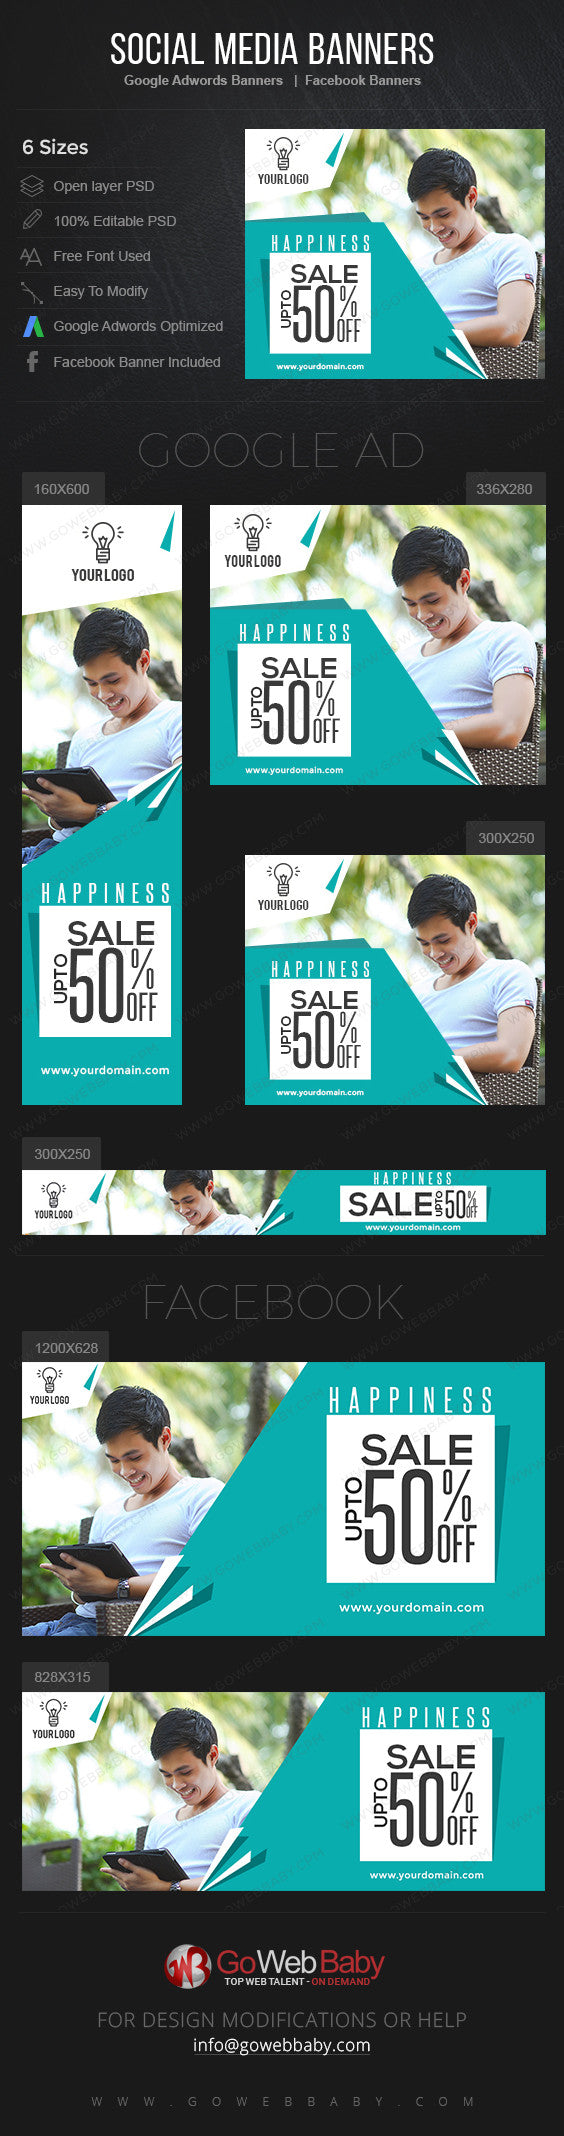 Google Adwords Display Banner With Facebook Banners - Happiness Sale For Website Marketing - GoWebBaby.Com